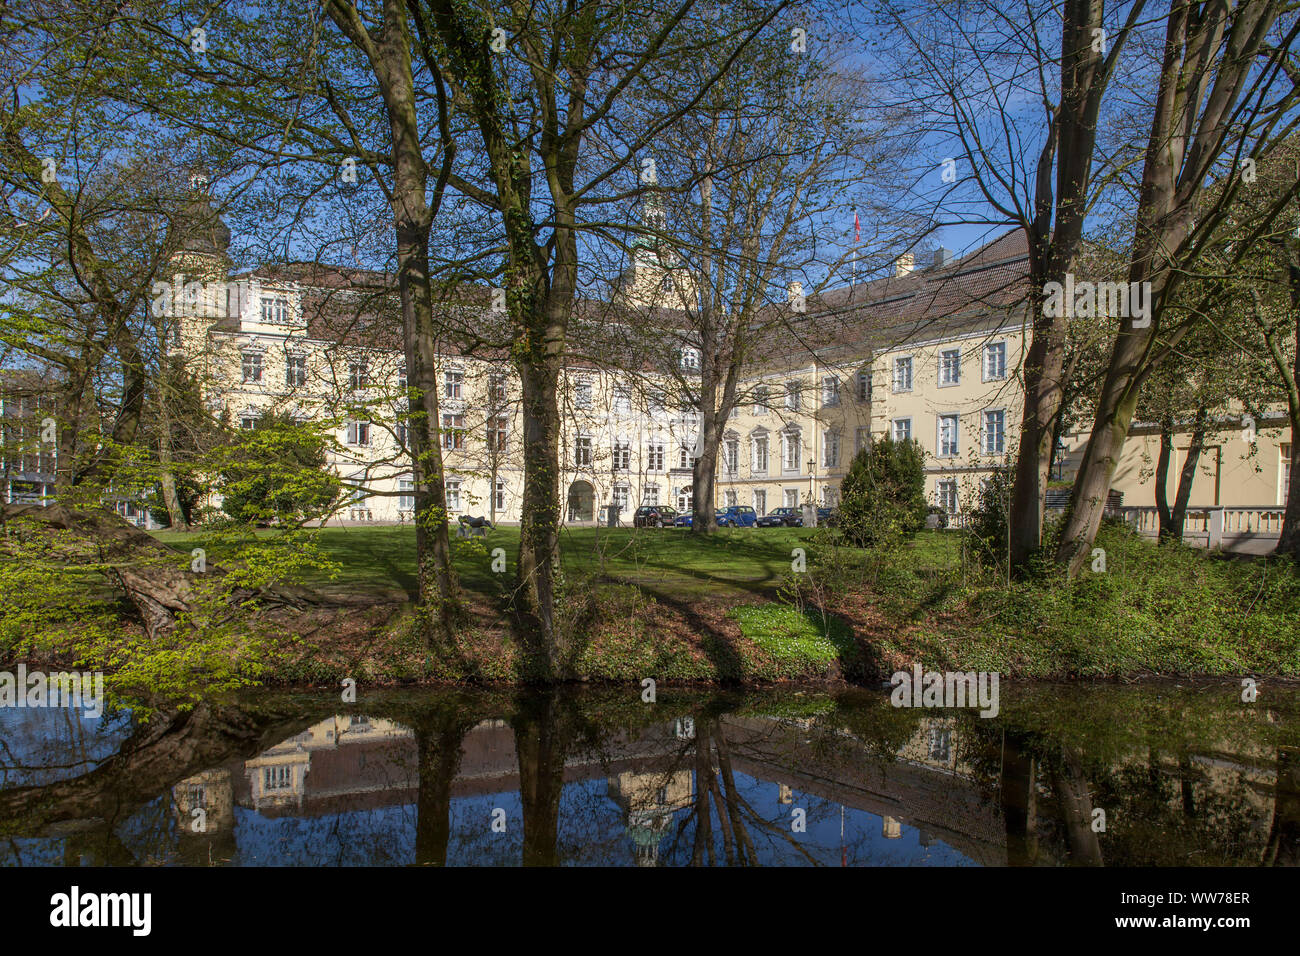 Oldenburg Palace, Museum of Art and Cultural History, City of Oldenburg in the District of Oldenburg, Lower Saxony, Germany Stock Photo